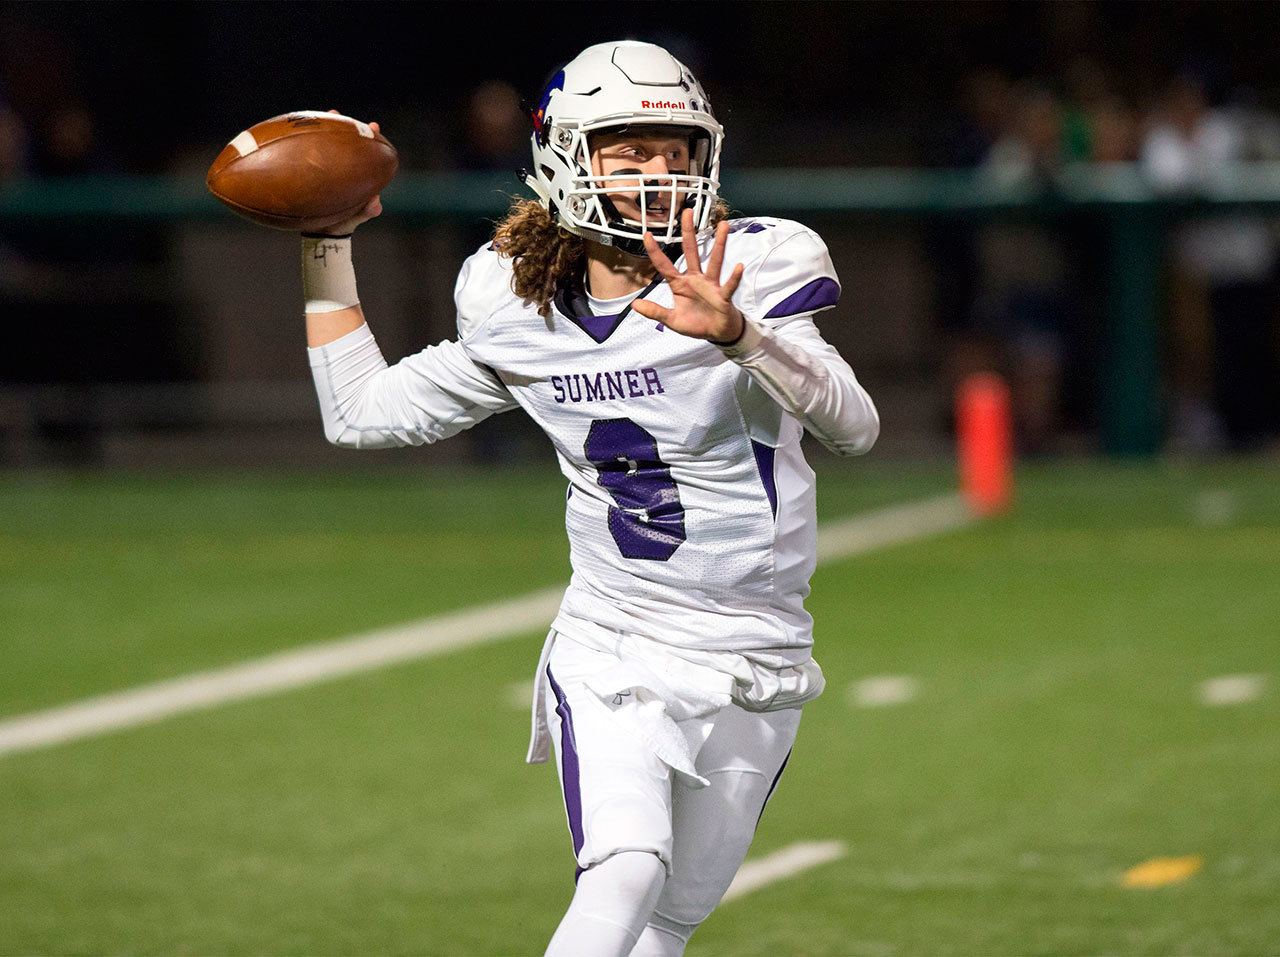 Sumner’s football season ends with loss in 4A semifinals